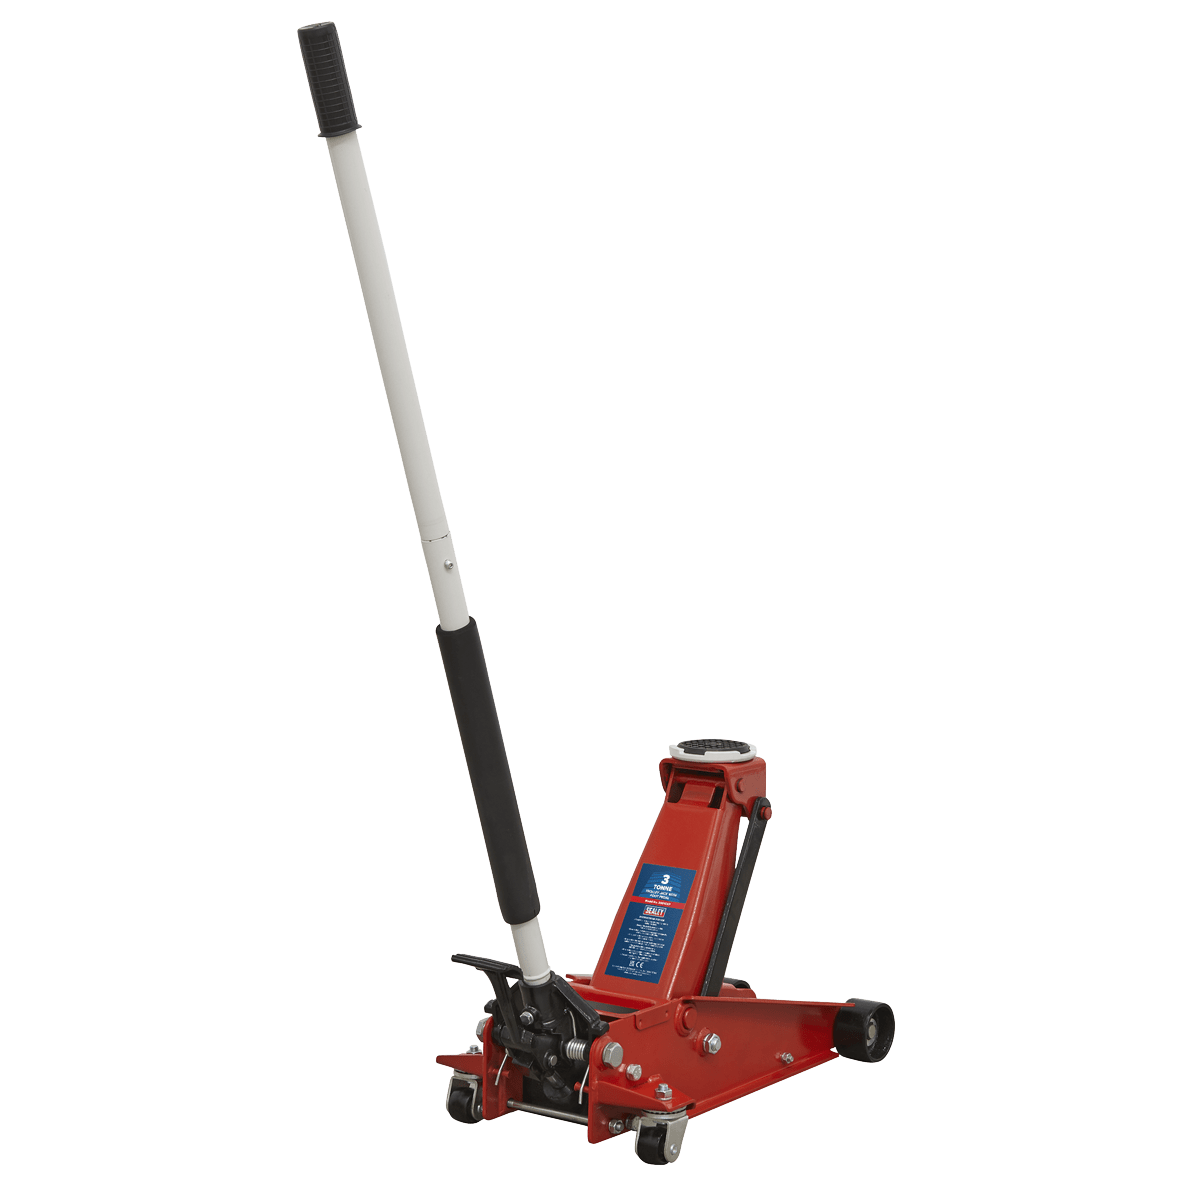 Sealey Trolley Jack 3tonne with Foot Pedal 3001CXP | Single-piece hydraulic unit with heavy base design. | Foot pedal as fast lifting alternative method of raising saddle, especially useful in restricted spaces. | toolforce.ie